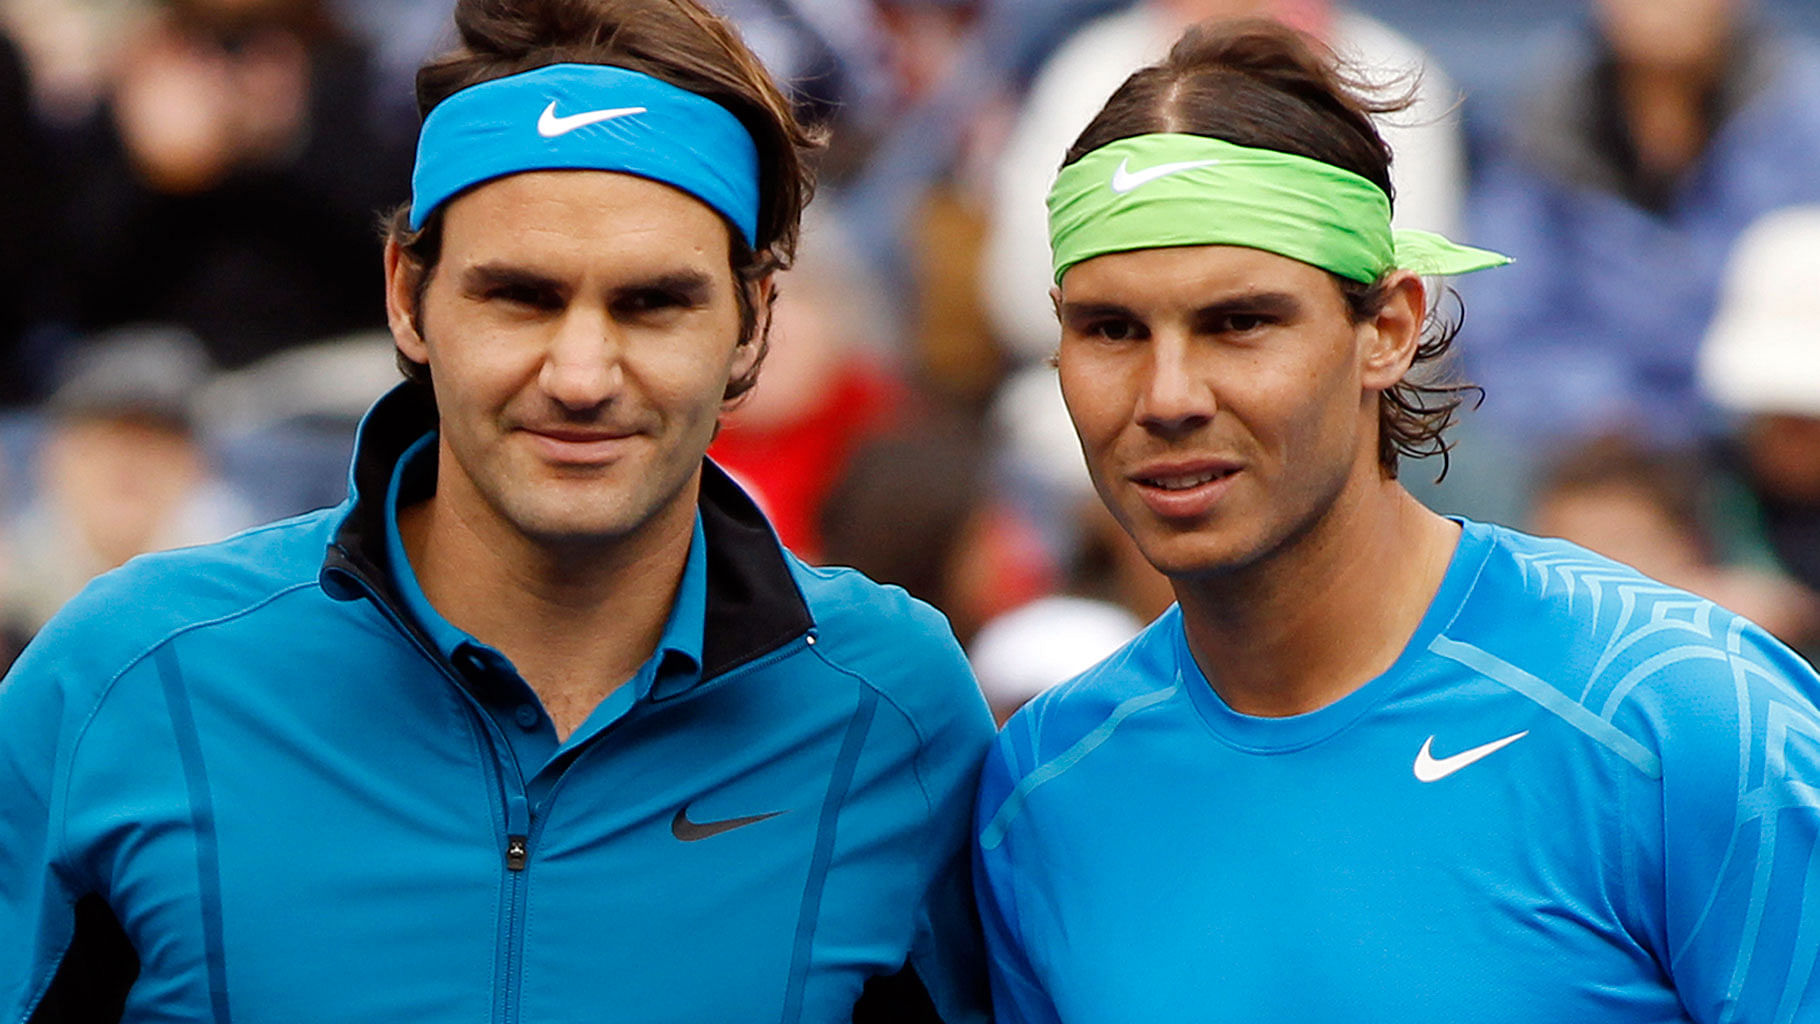 Roger Federer and Rafael Nadal Plan to Team Up in Laver Cup